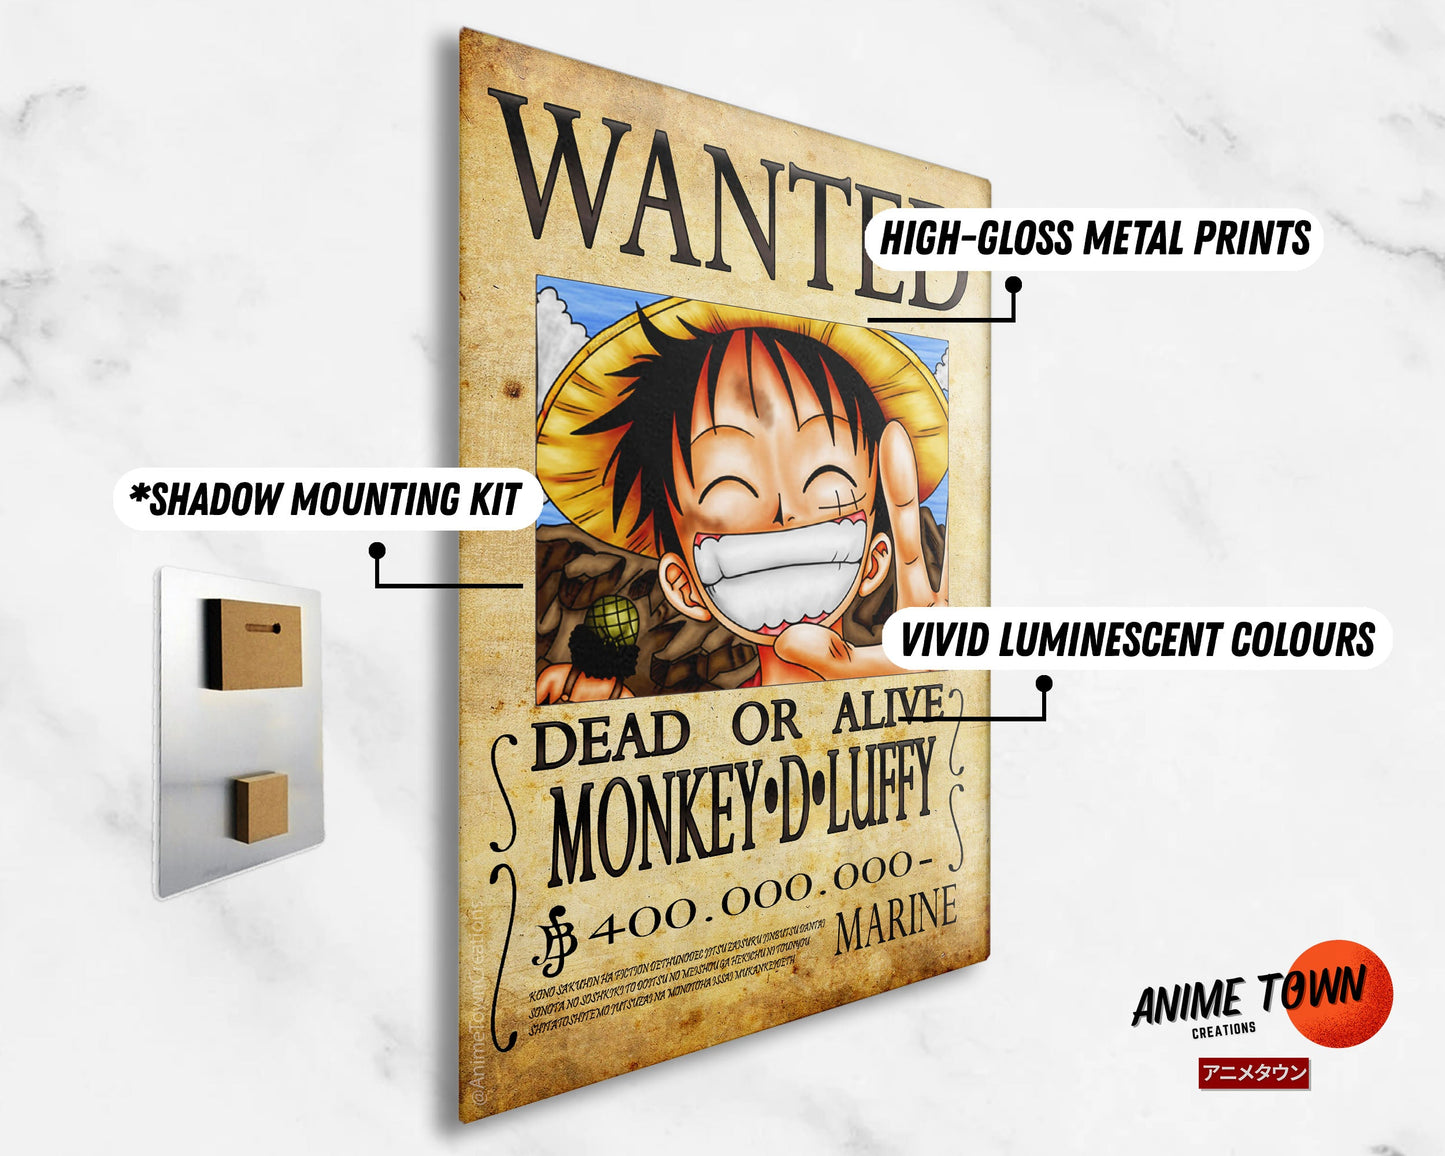 Gadget, ONE PIECE LUFFY WANTED NEW WORLD METAL PLATE, Gadgets